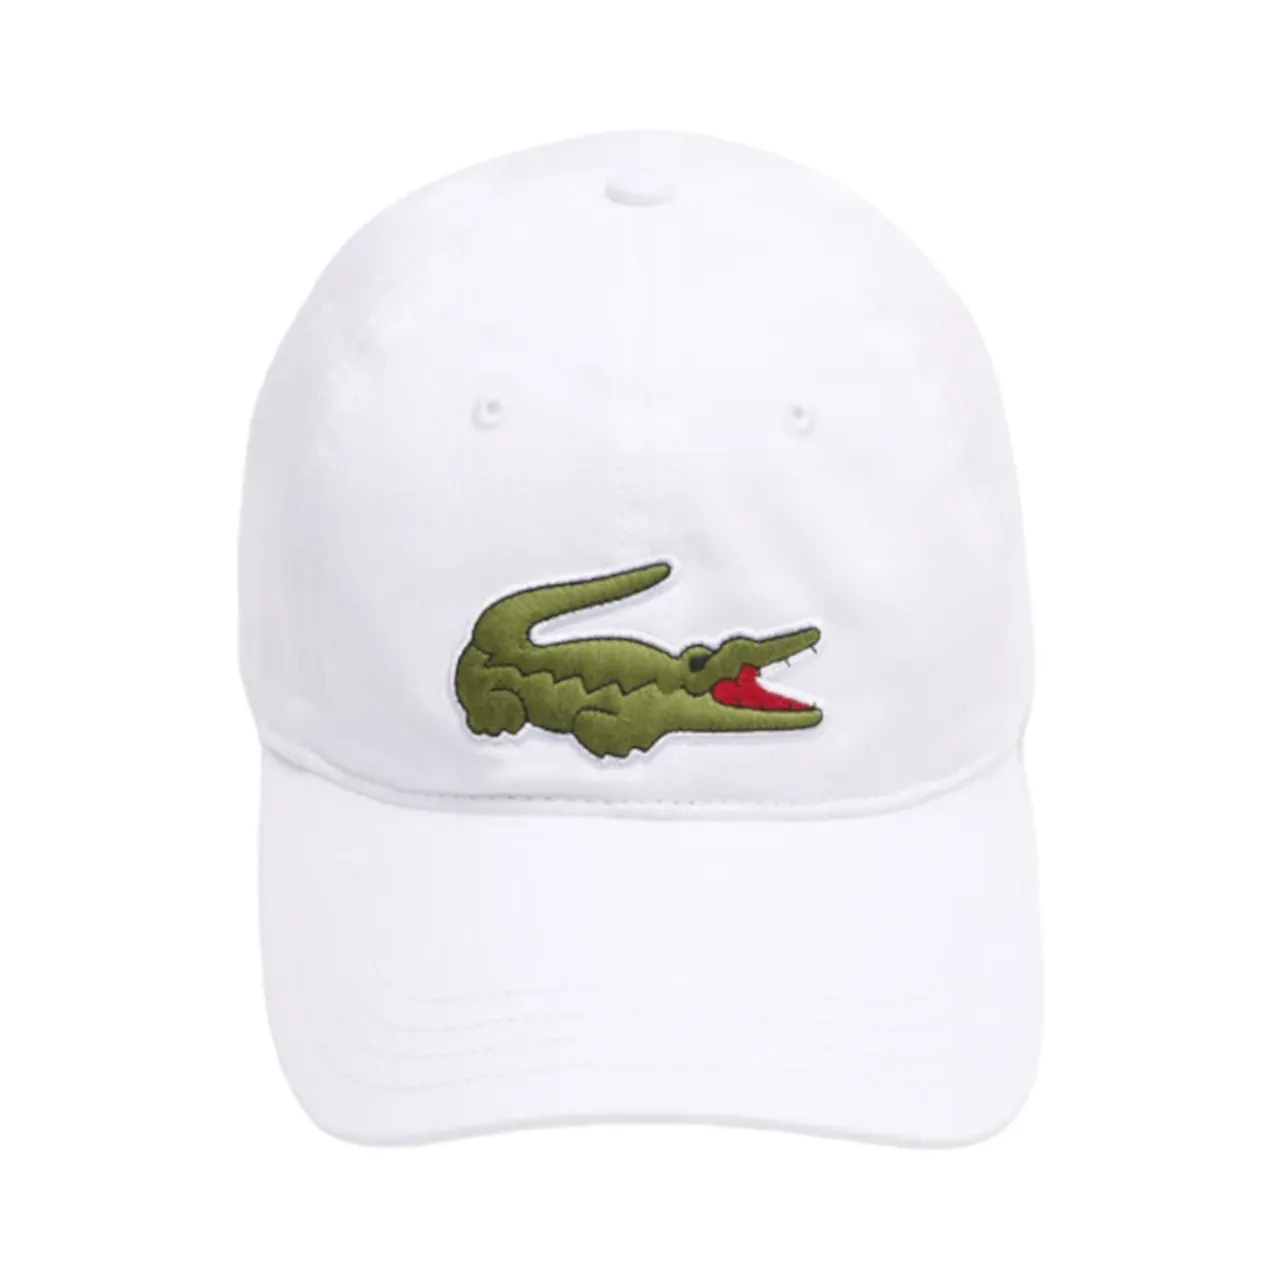 Lacoste , White Hats Collection ,White male, Sizes: ONE